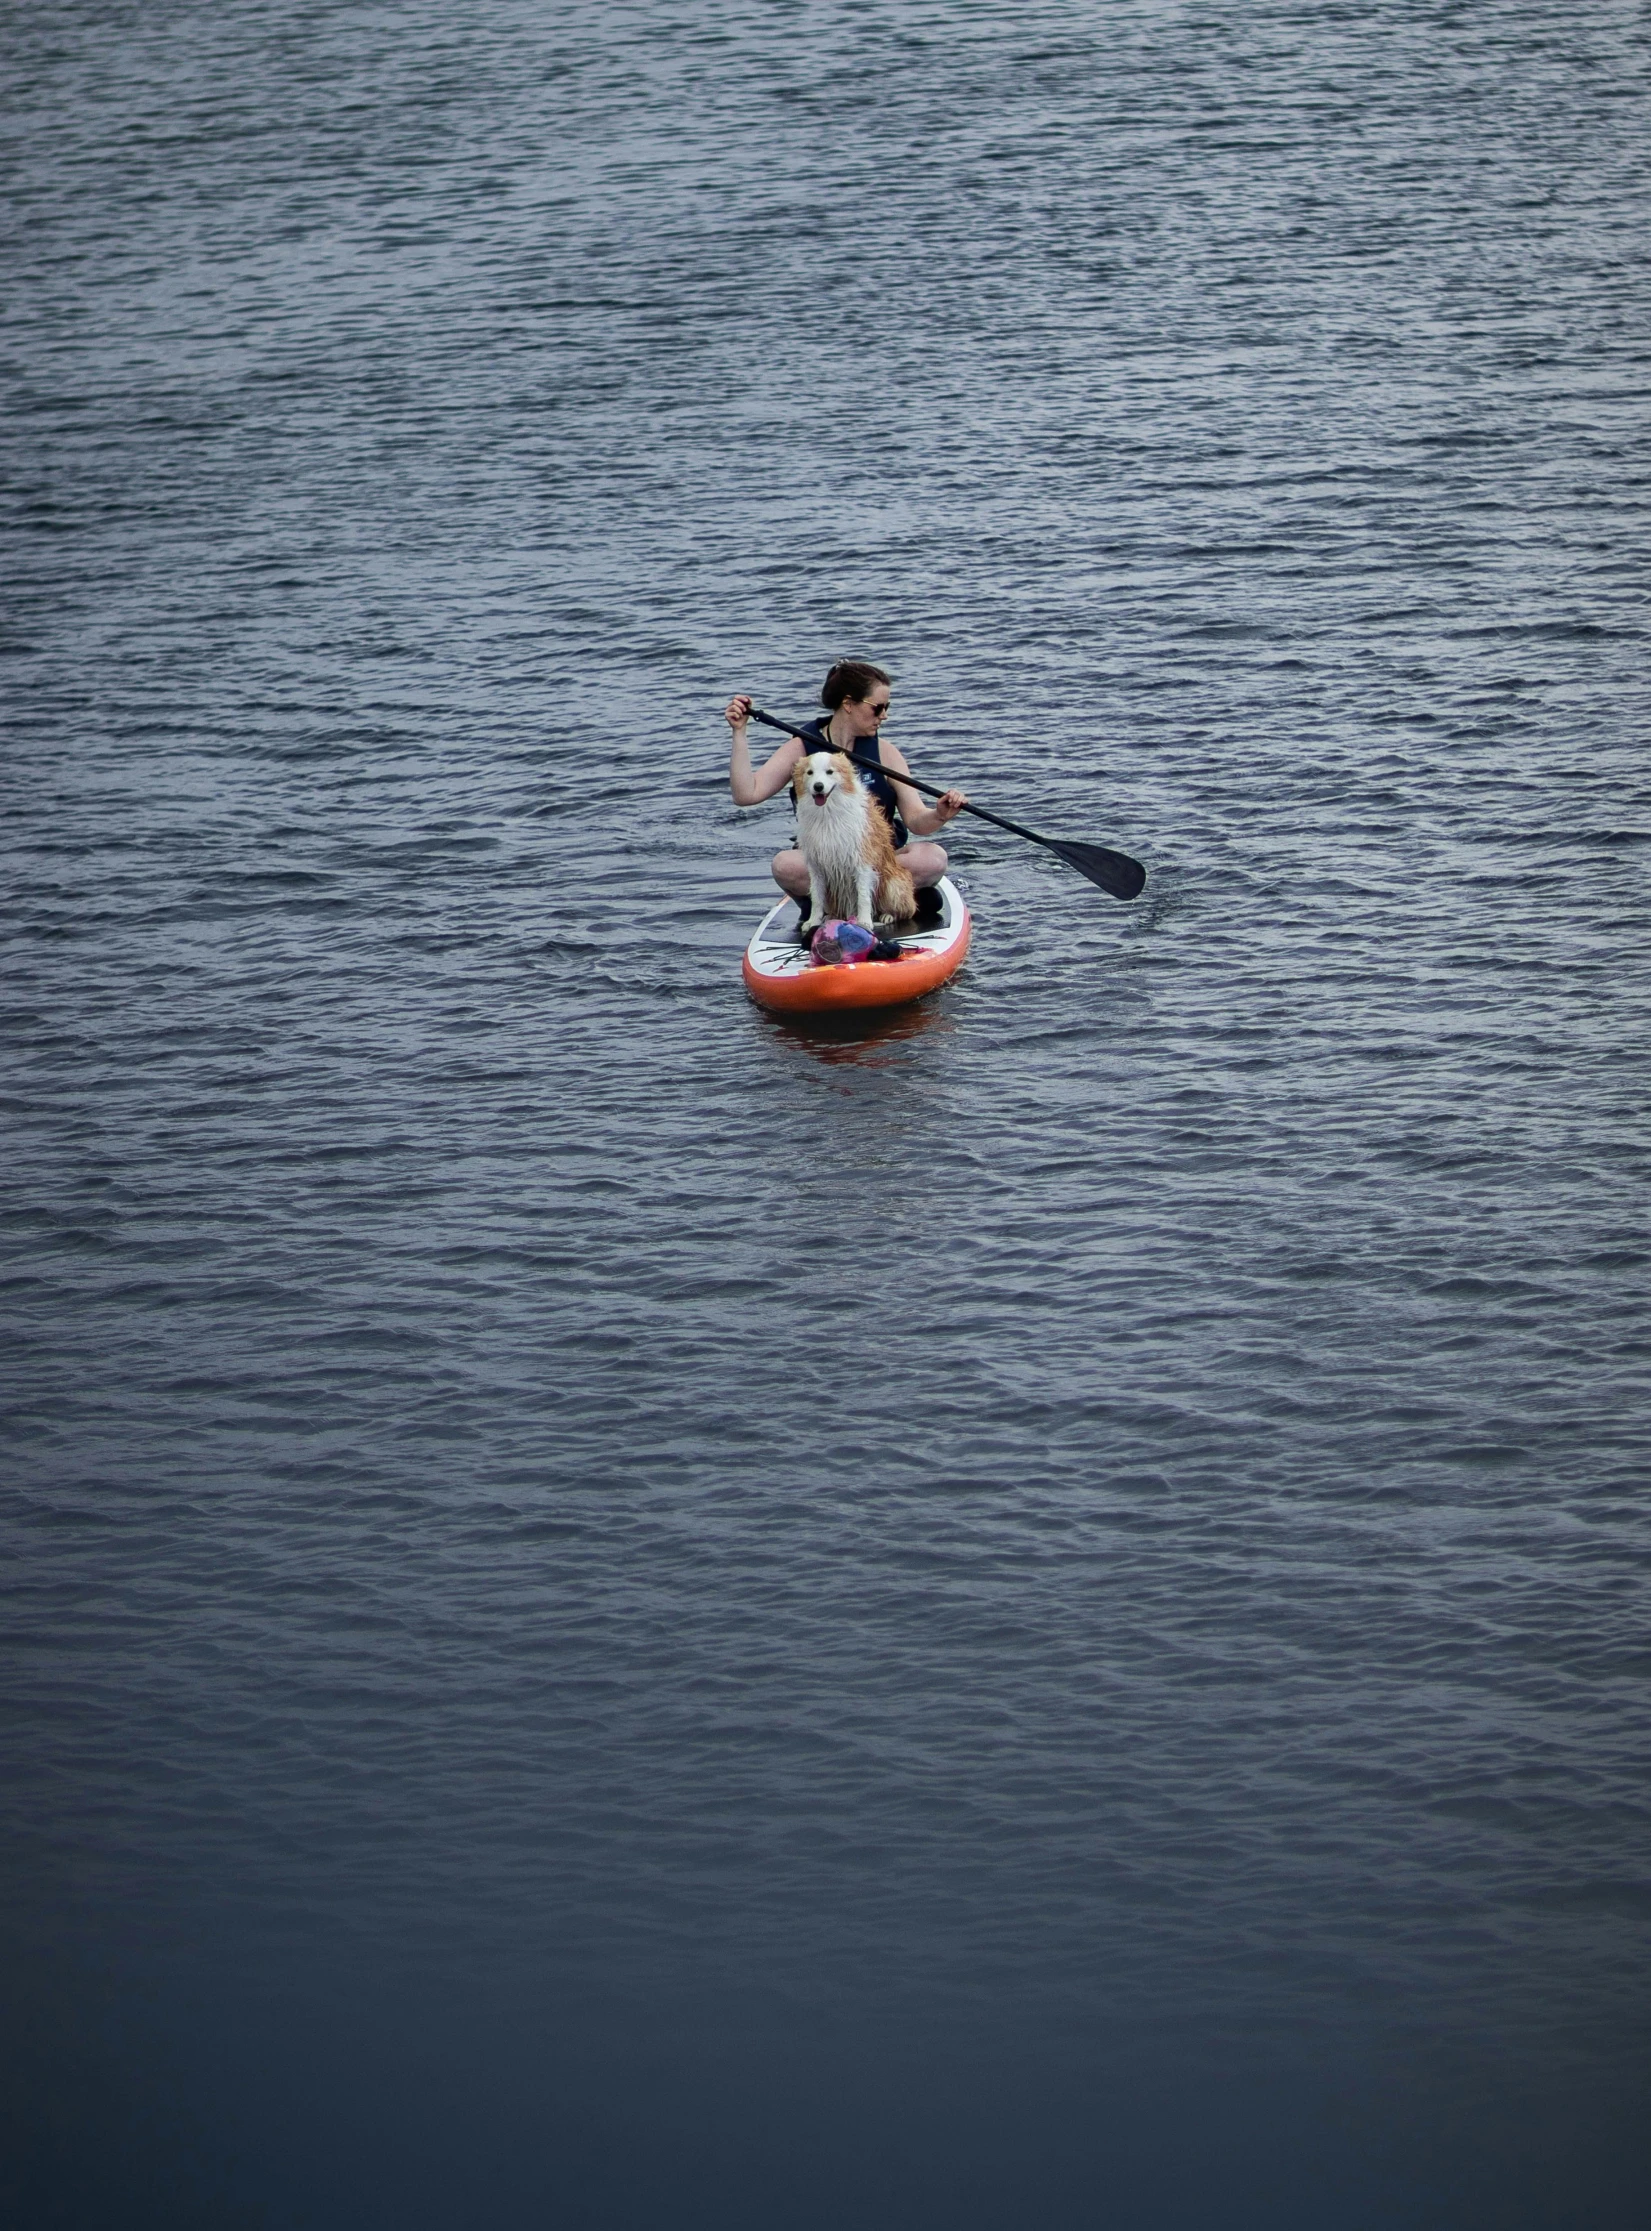 a man is canoeing with his dog in the water